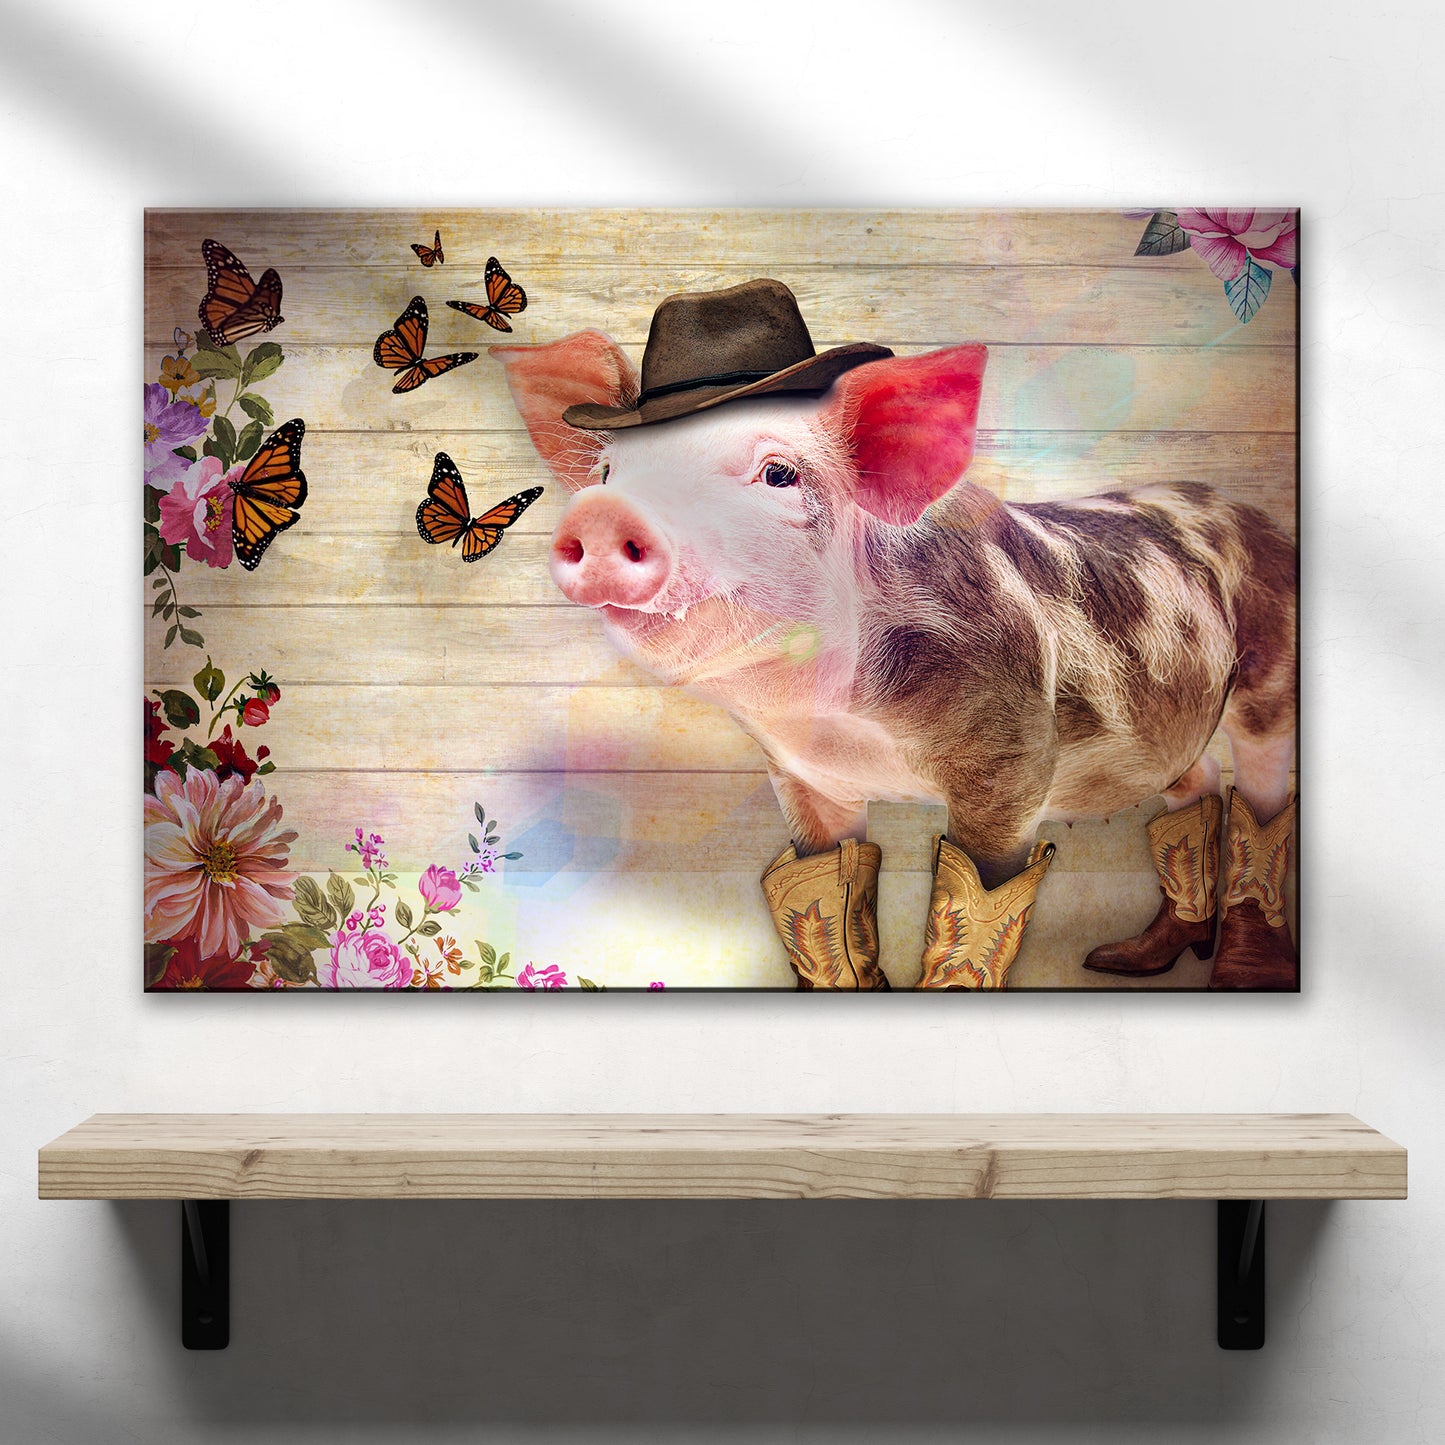 Cowboy Pig And Butterflies Canvas Wall Art - Image by Tailored Canvases